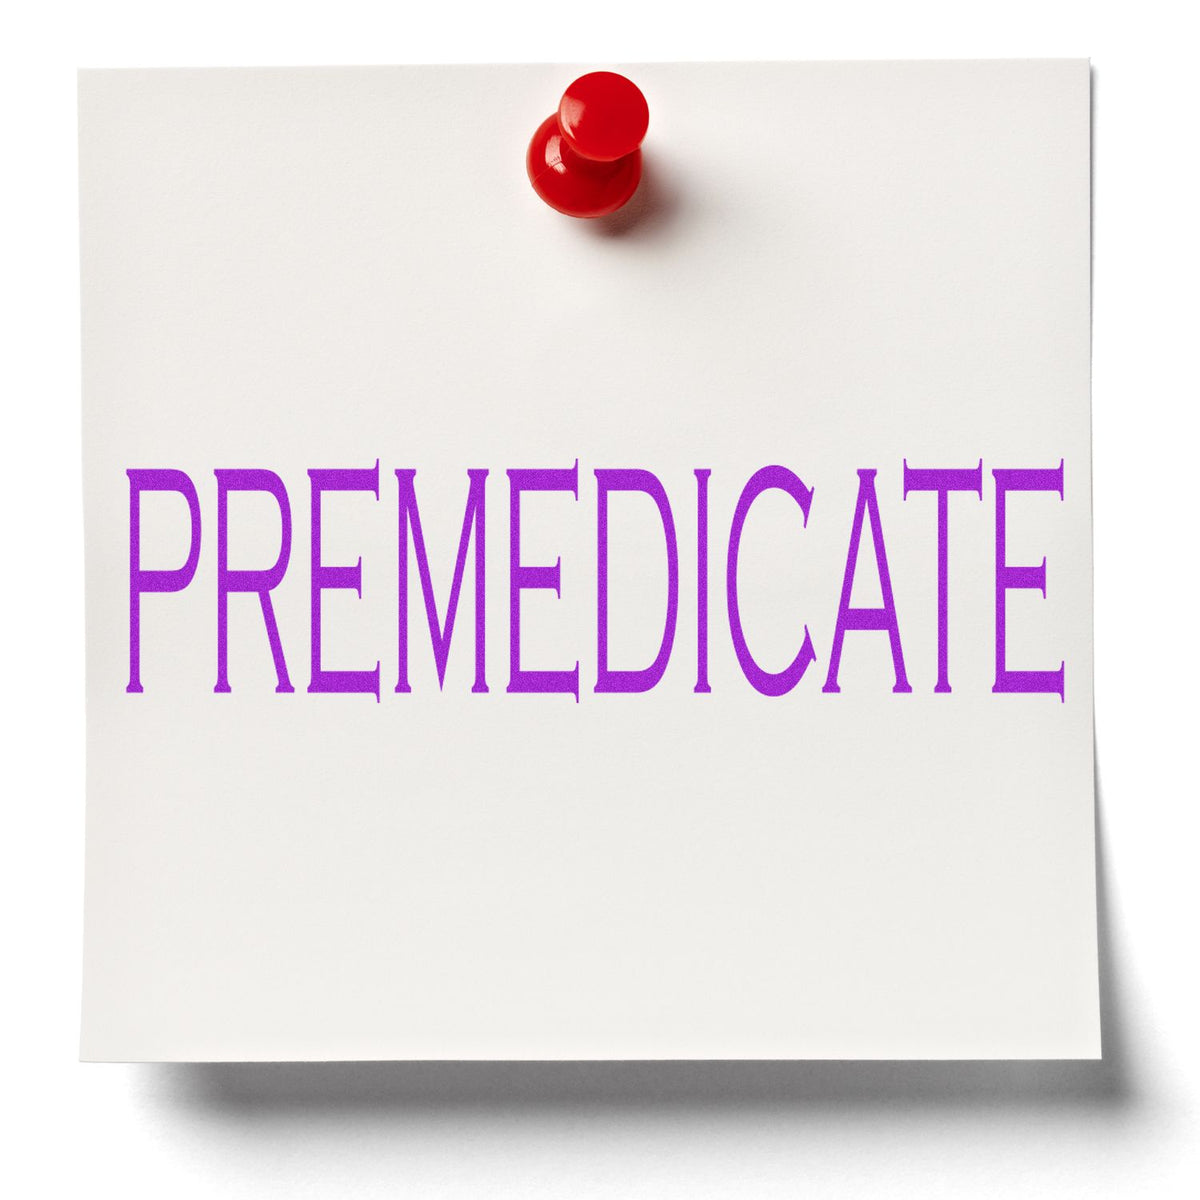 Large Premedicate Rubber Stamp In Use